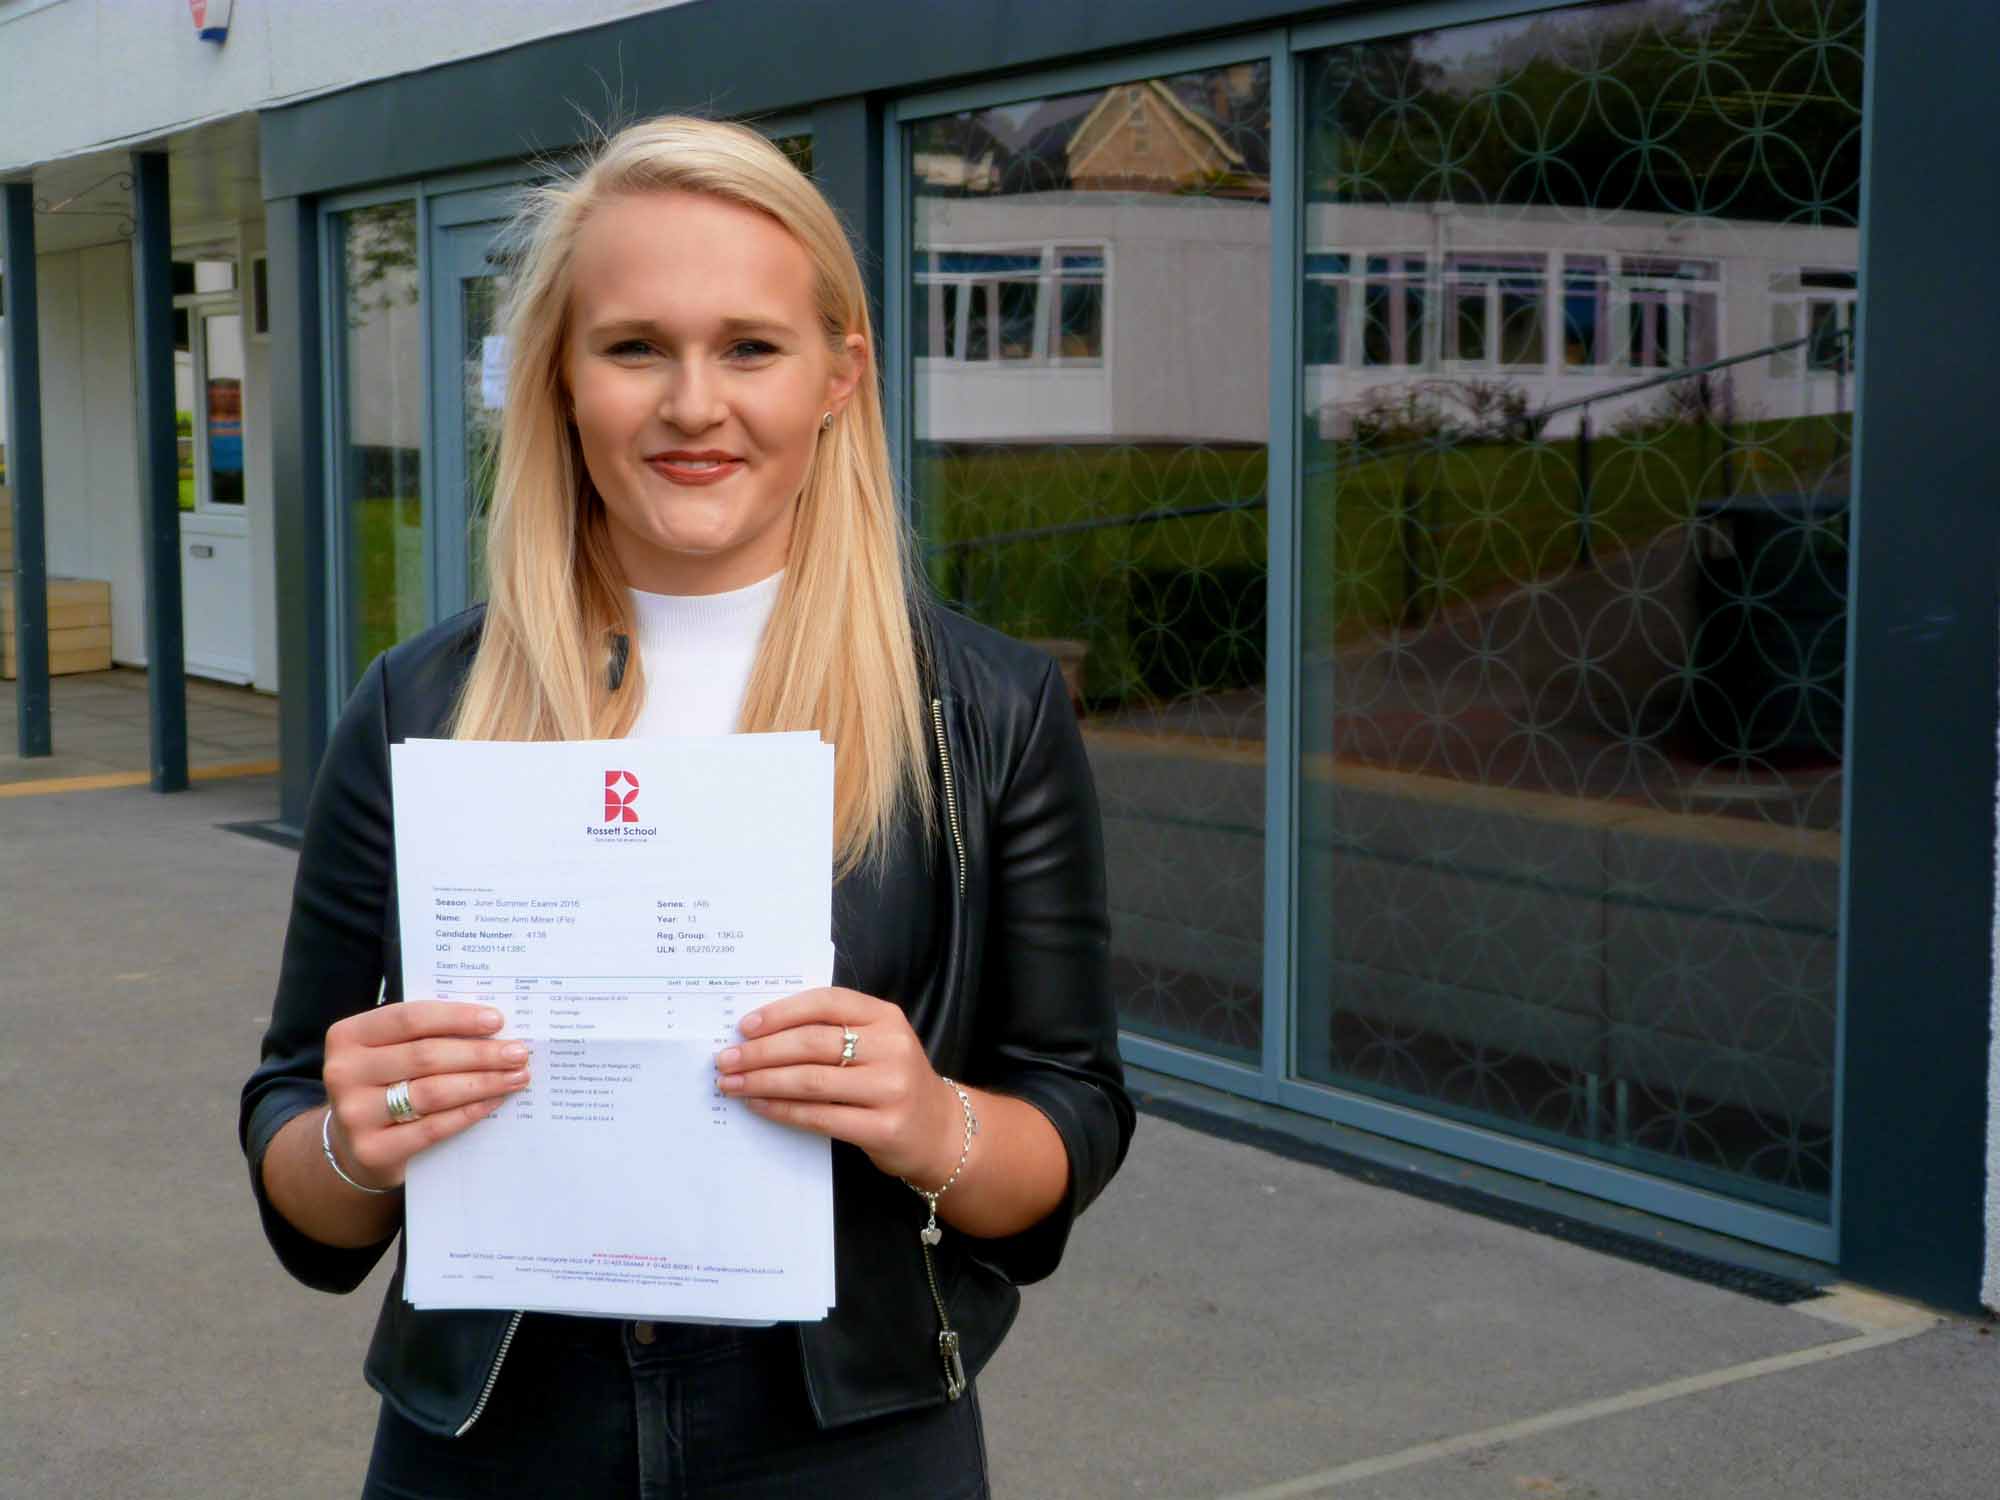 Flo Milner will head to Kings College London to study Law after achieving A*A*A at Rossett School